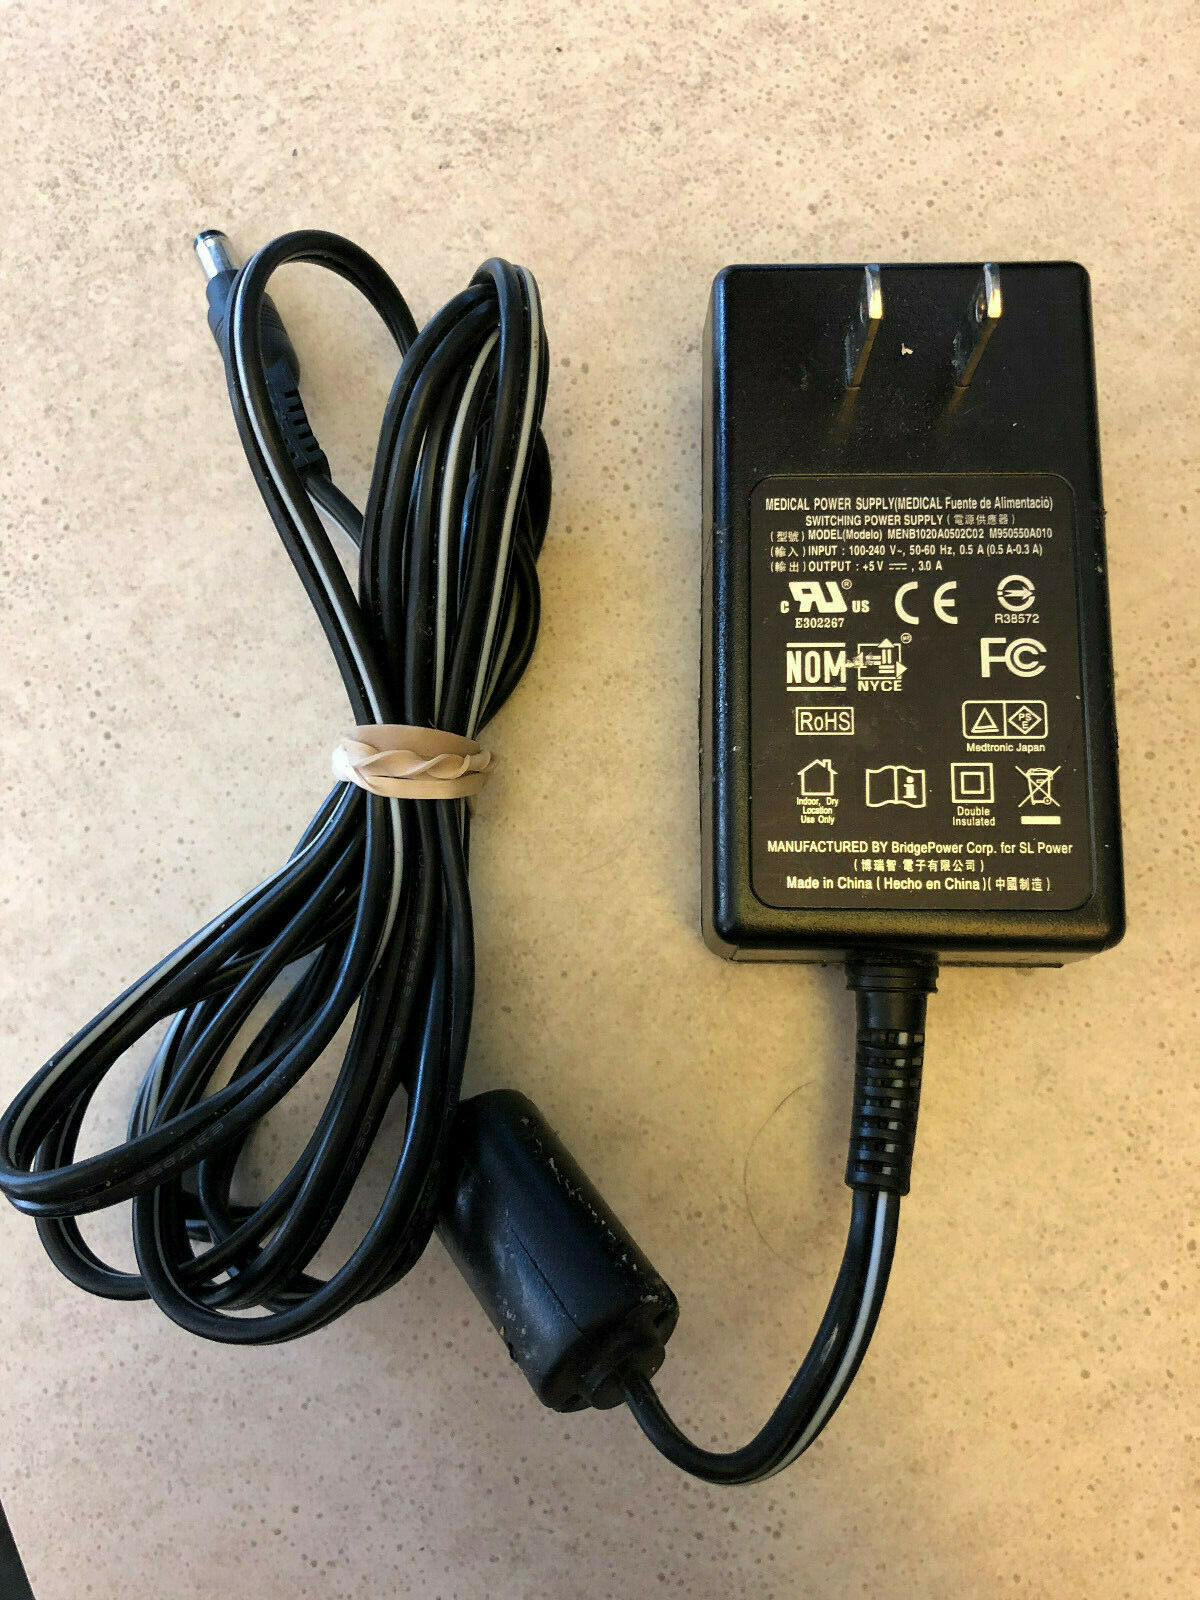 New AULT 5v 3a MENB1020A0502C02 M950550A010 Medical Power Supply AC Adapter Specification: Brand